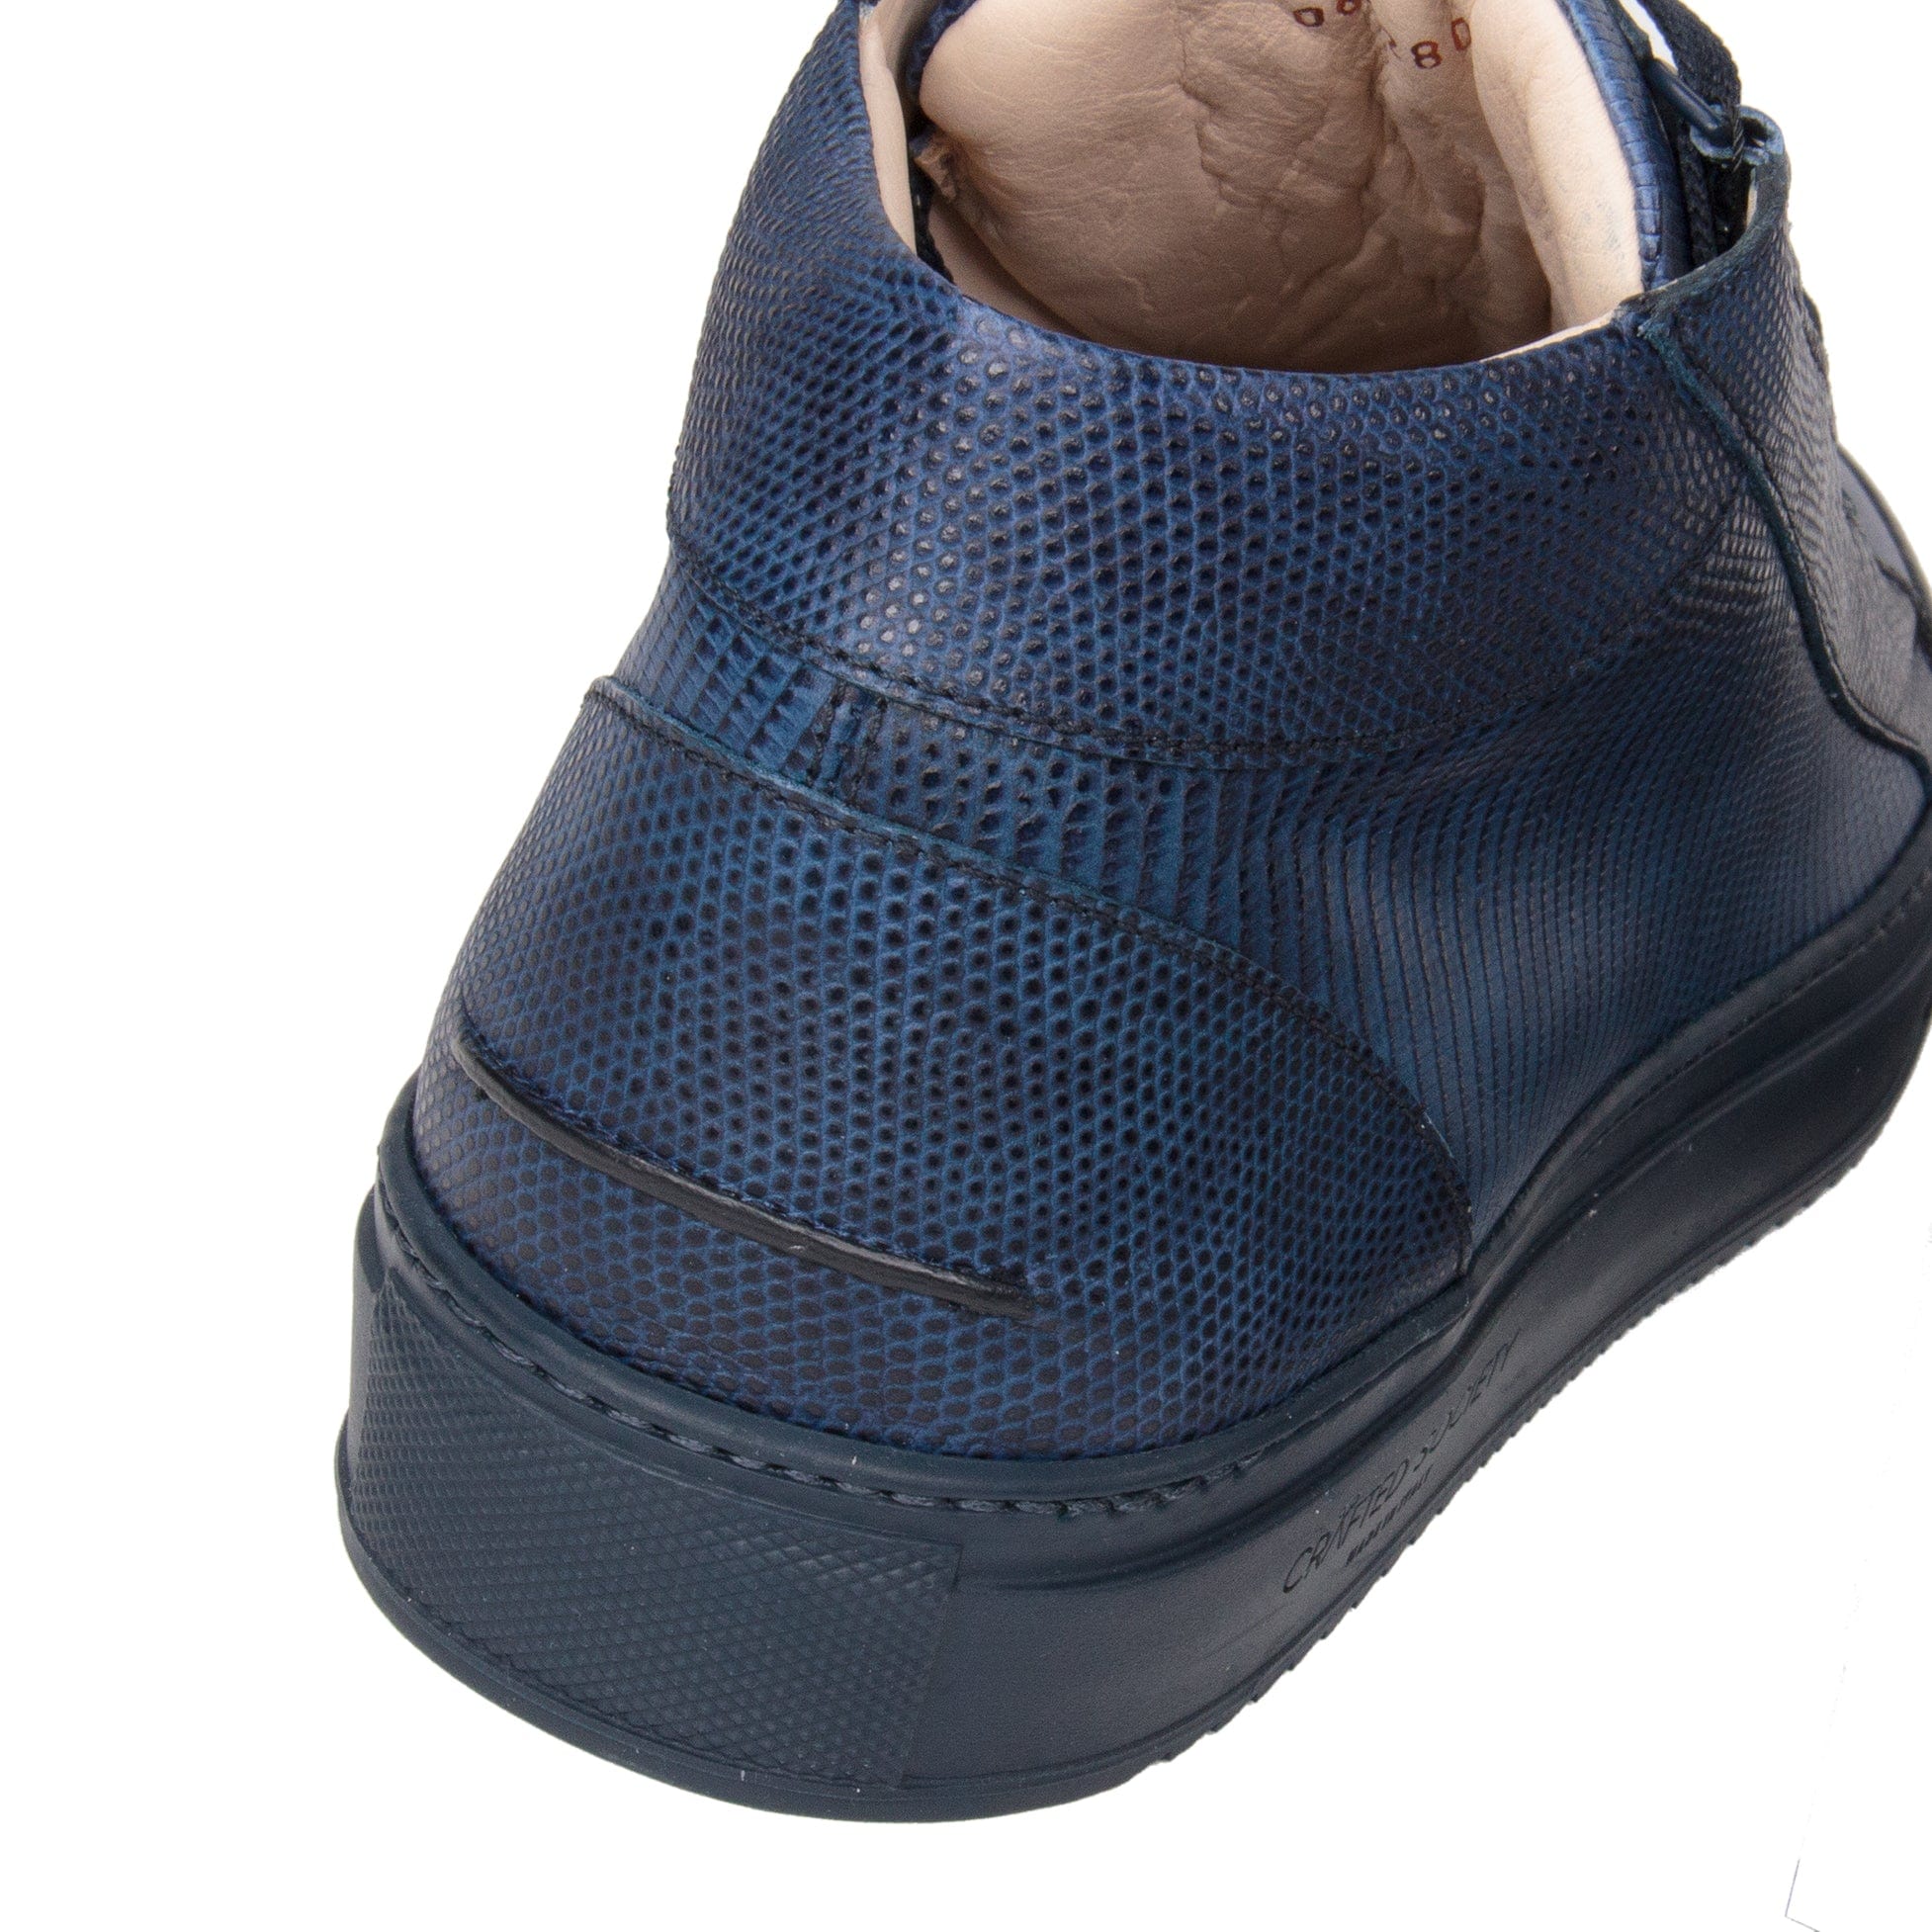 Rico Mid Sneaker Navy Stingray effect Navy Outsole Saffiano Leather - Backview